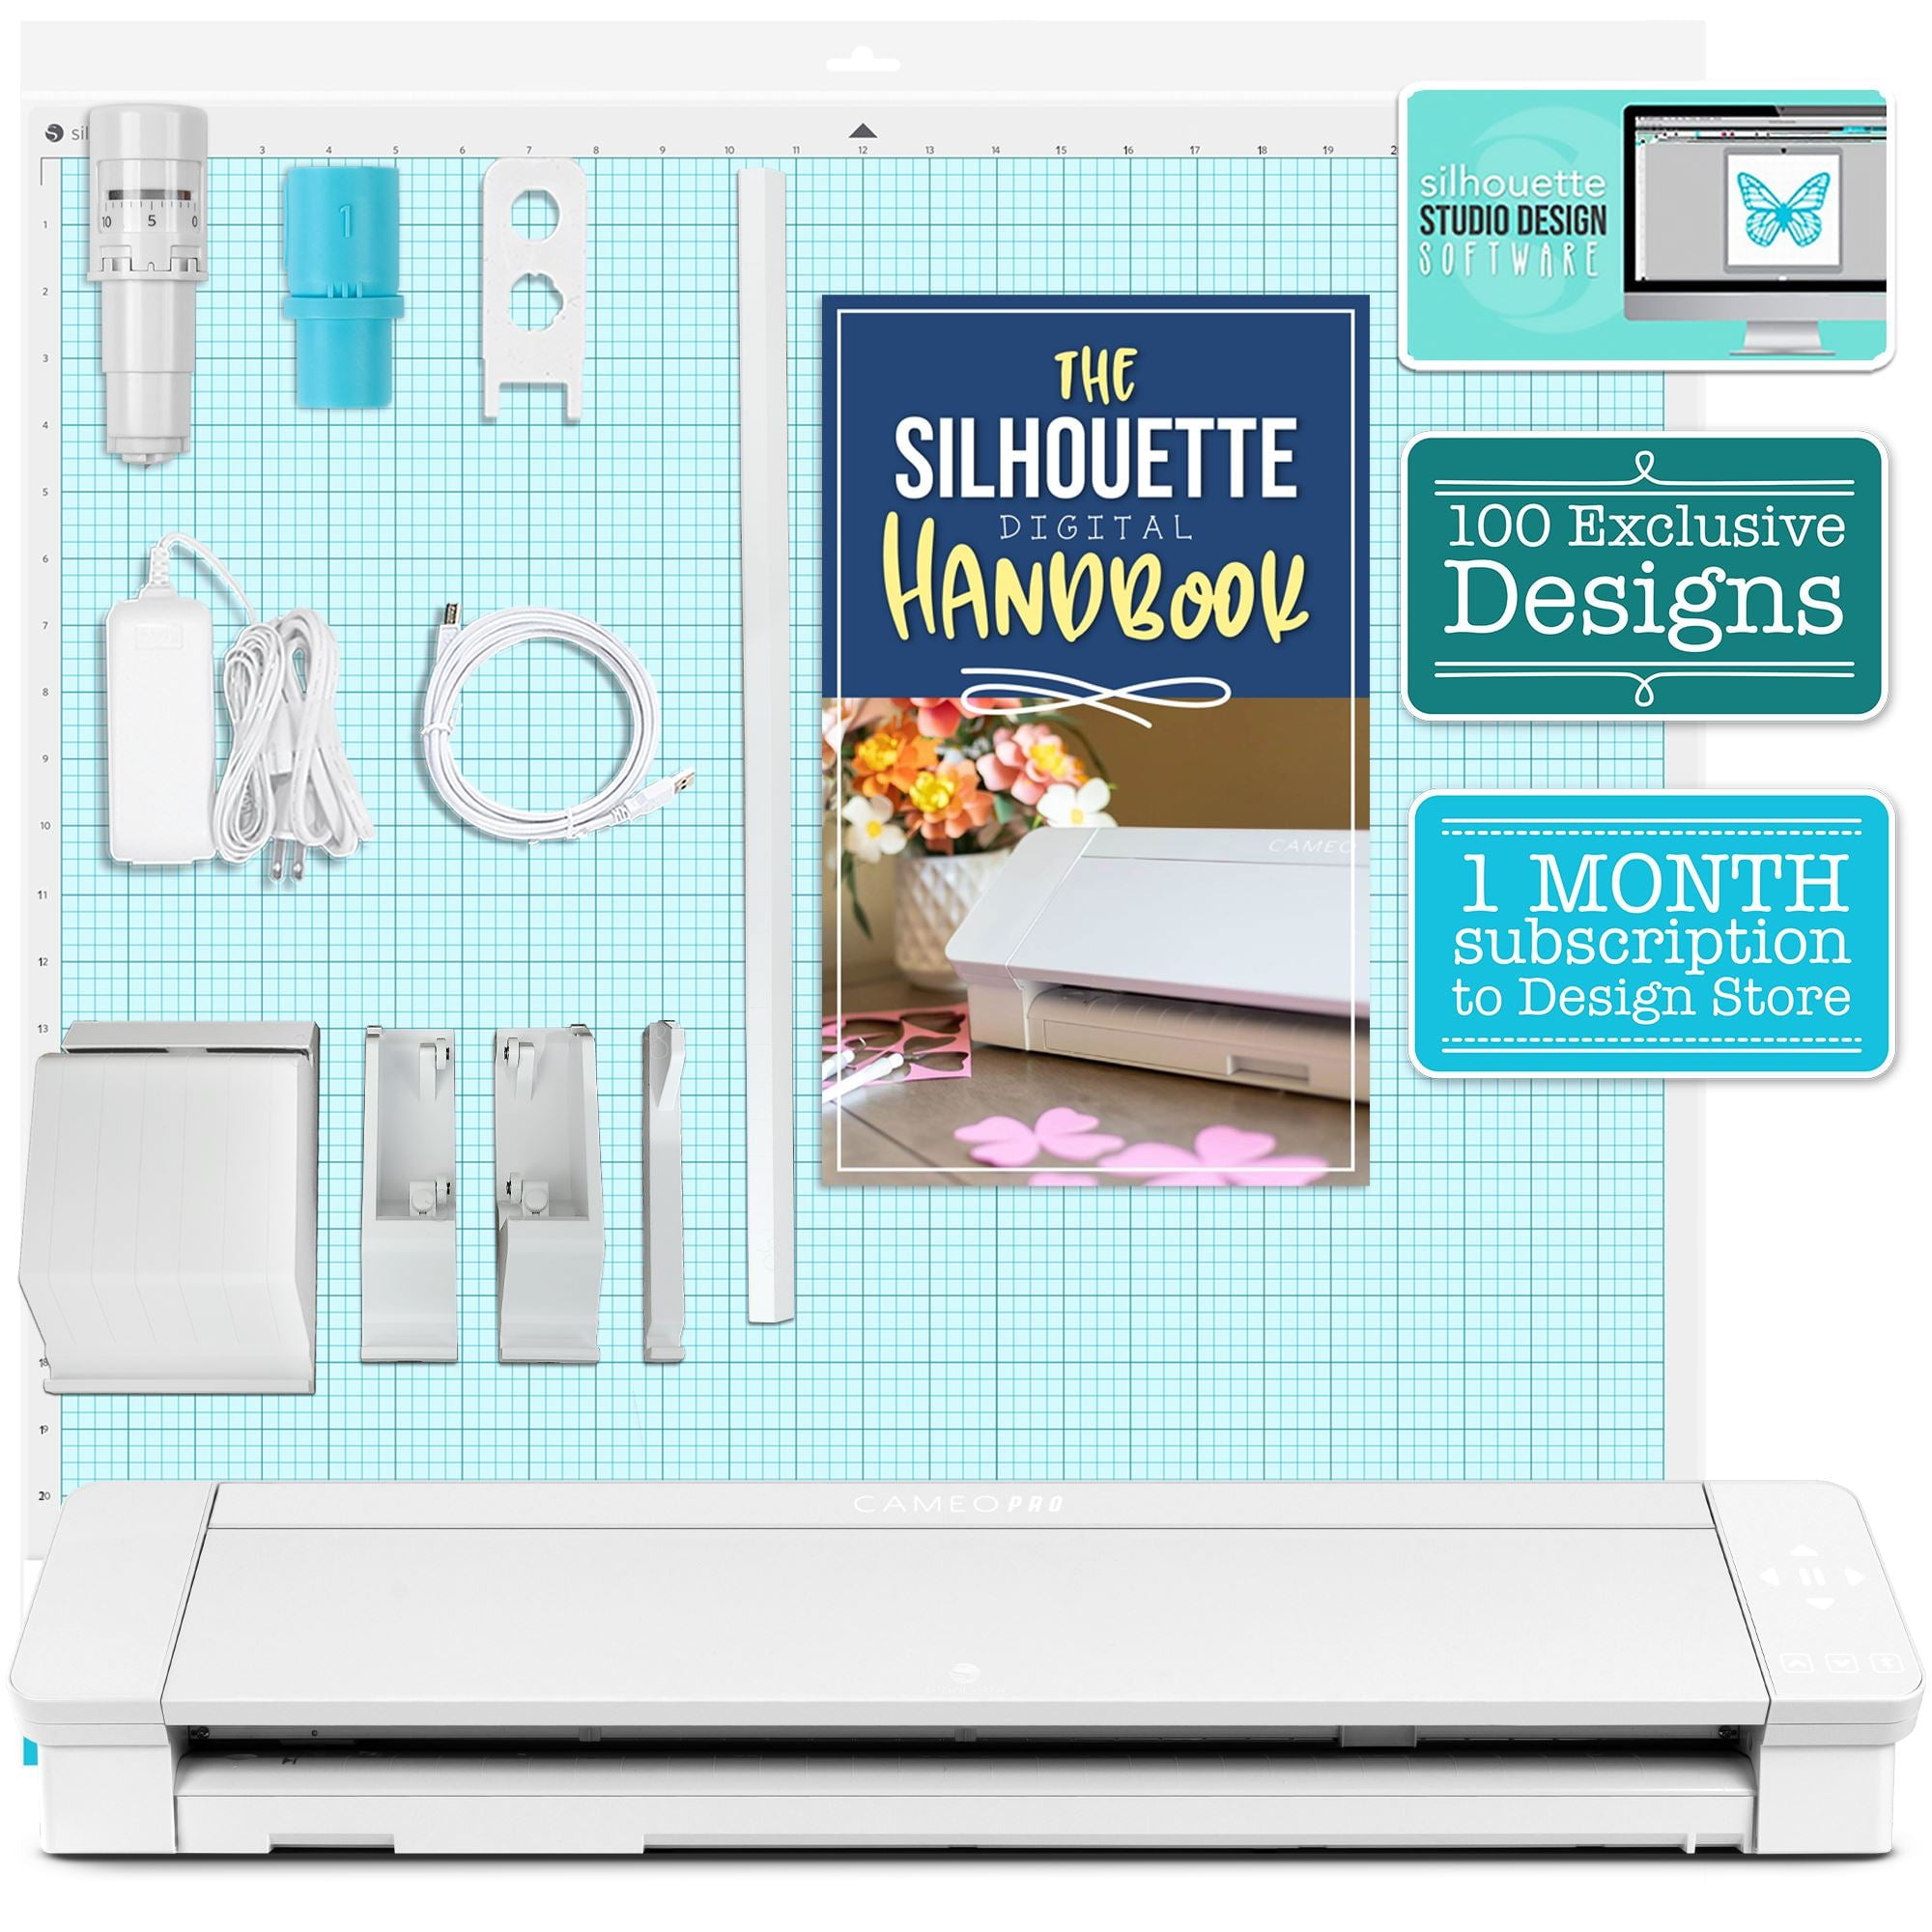 Silhouette Cameo 4 with Bluetooth, 12x12 Cutting Mat, Autoblade 2, 100  Designs and Silhouette Studio Software - Pink Pattern Edition